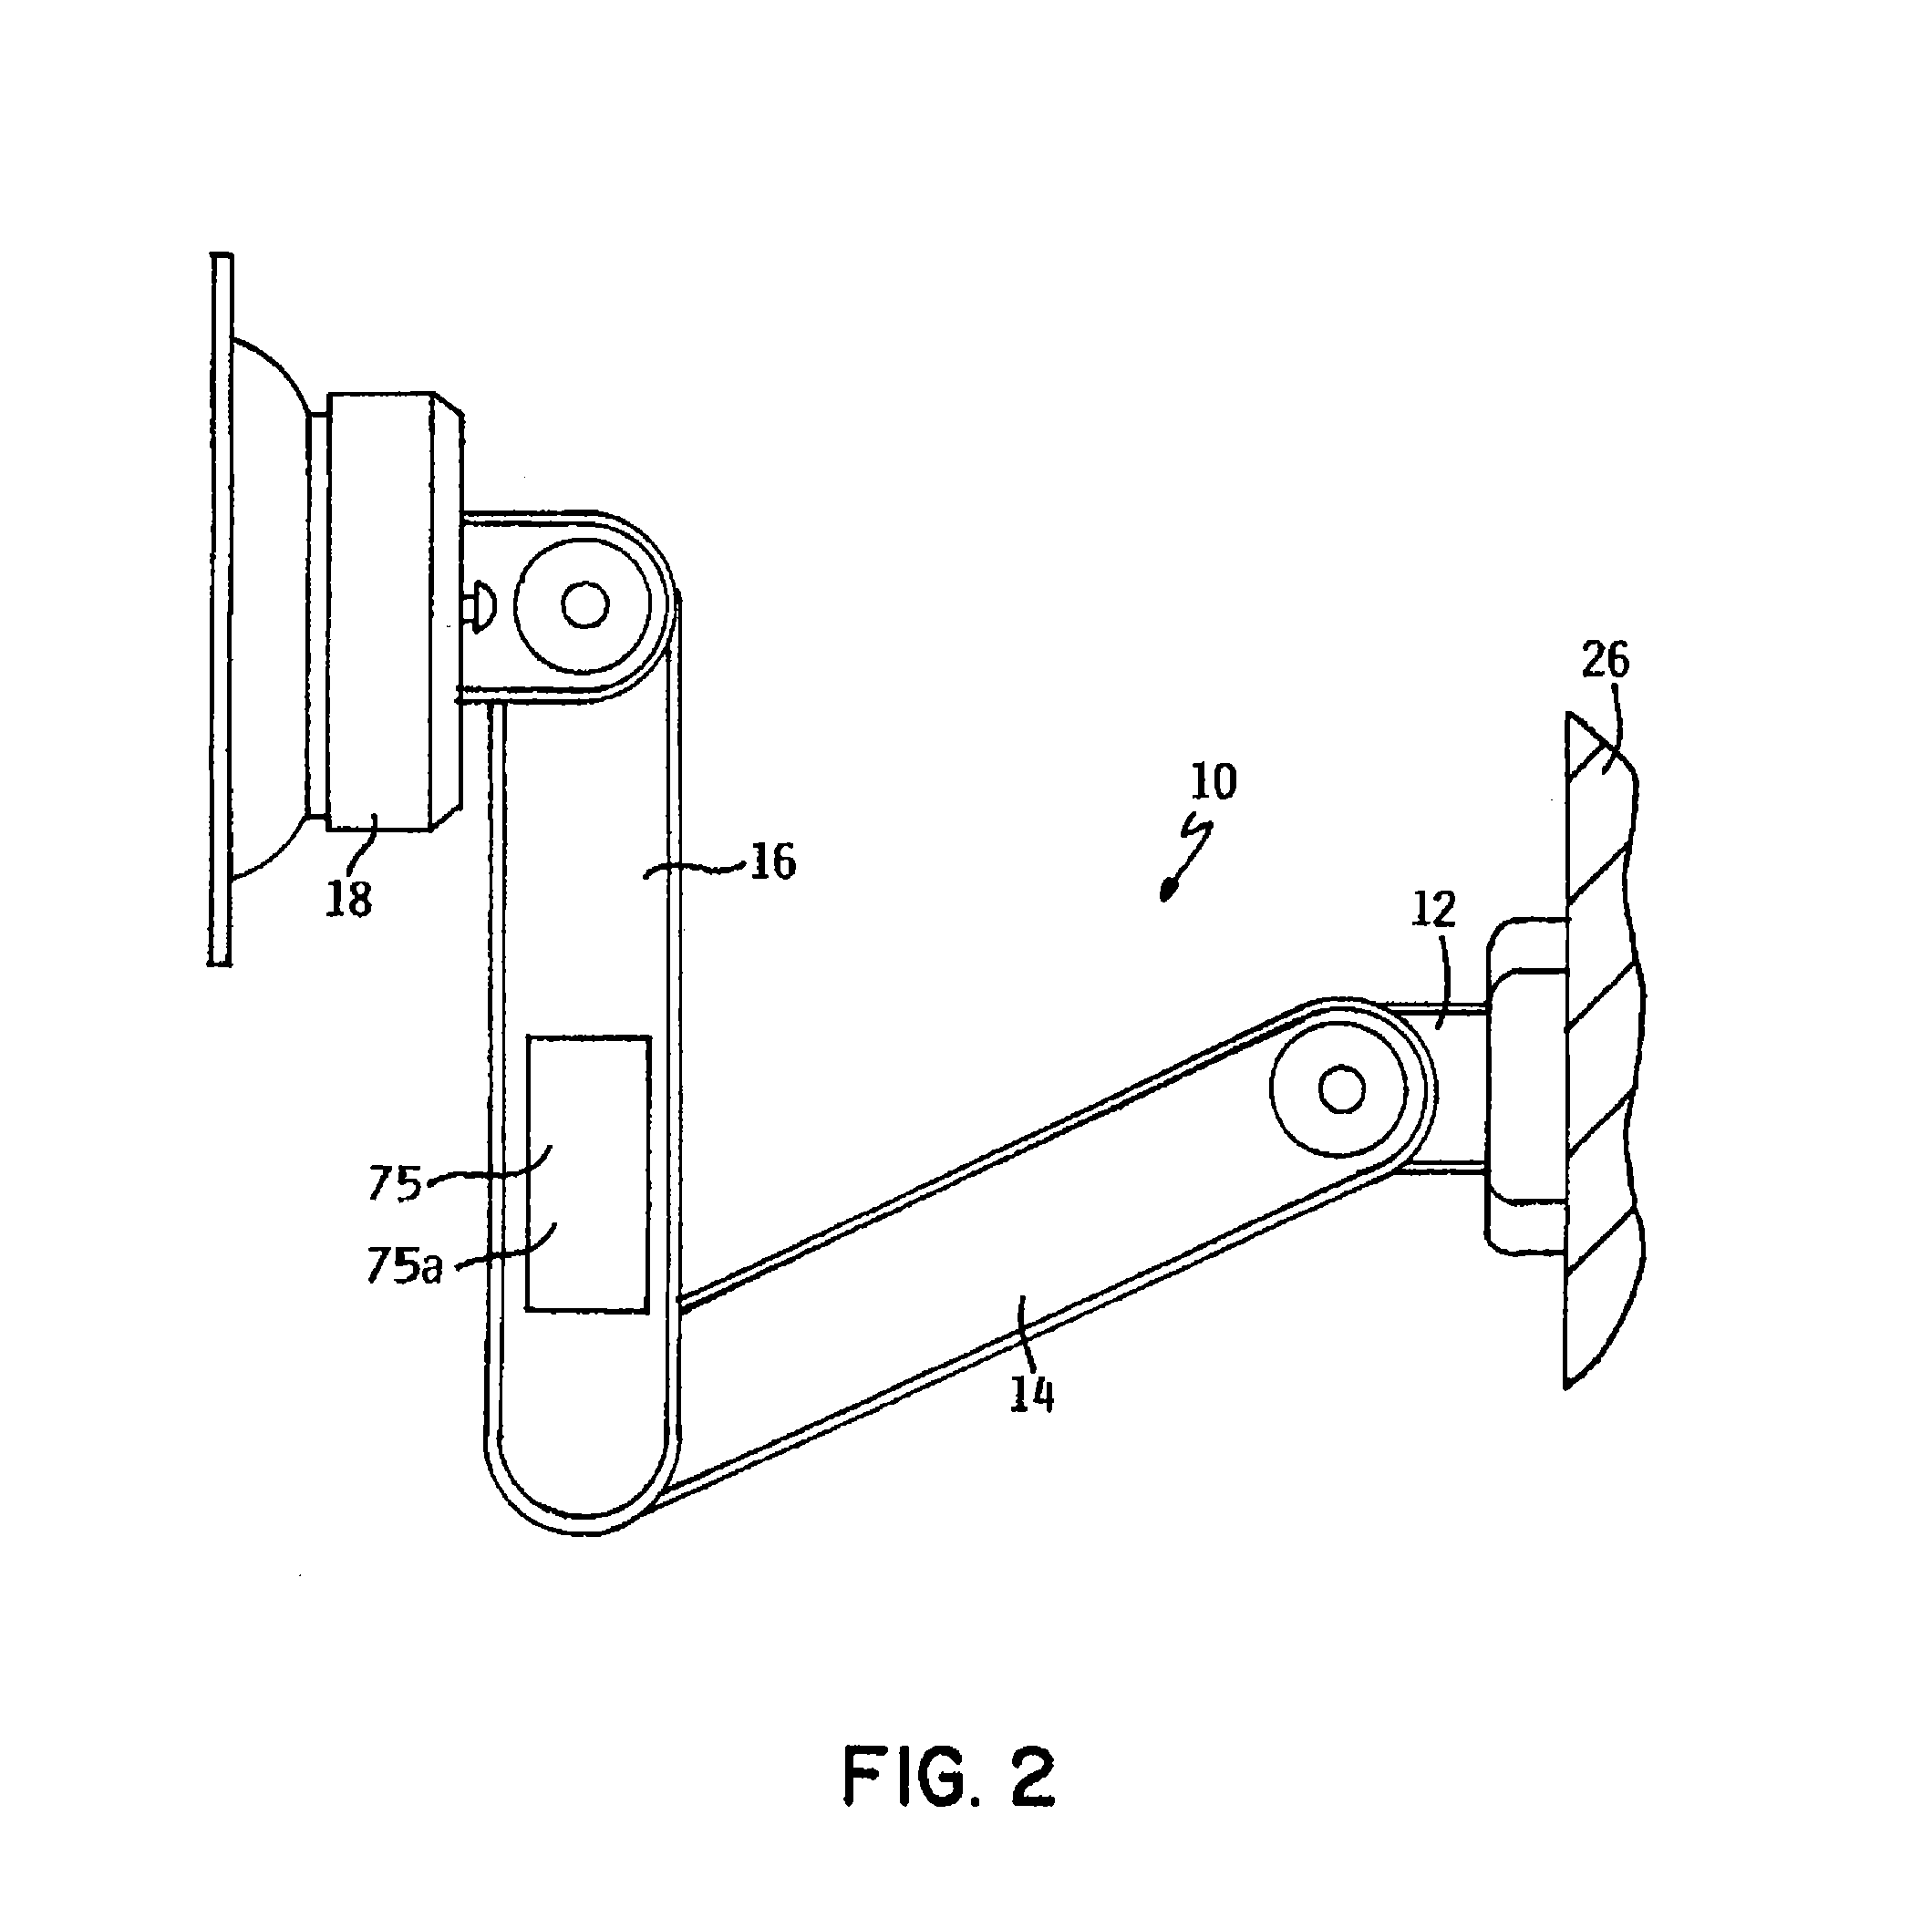 Mount and electronic display system